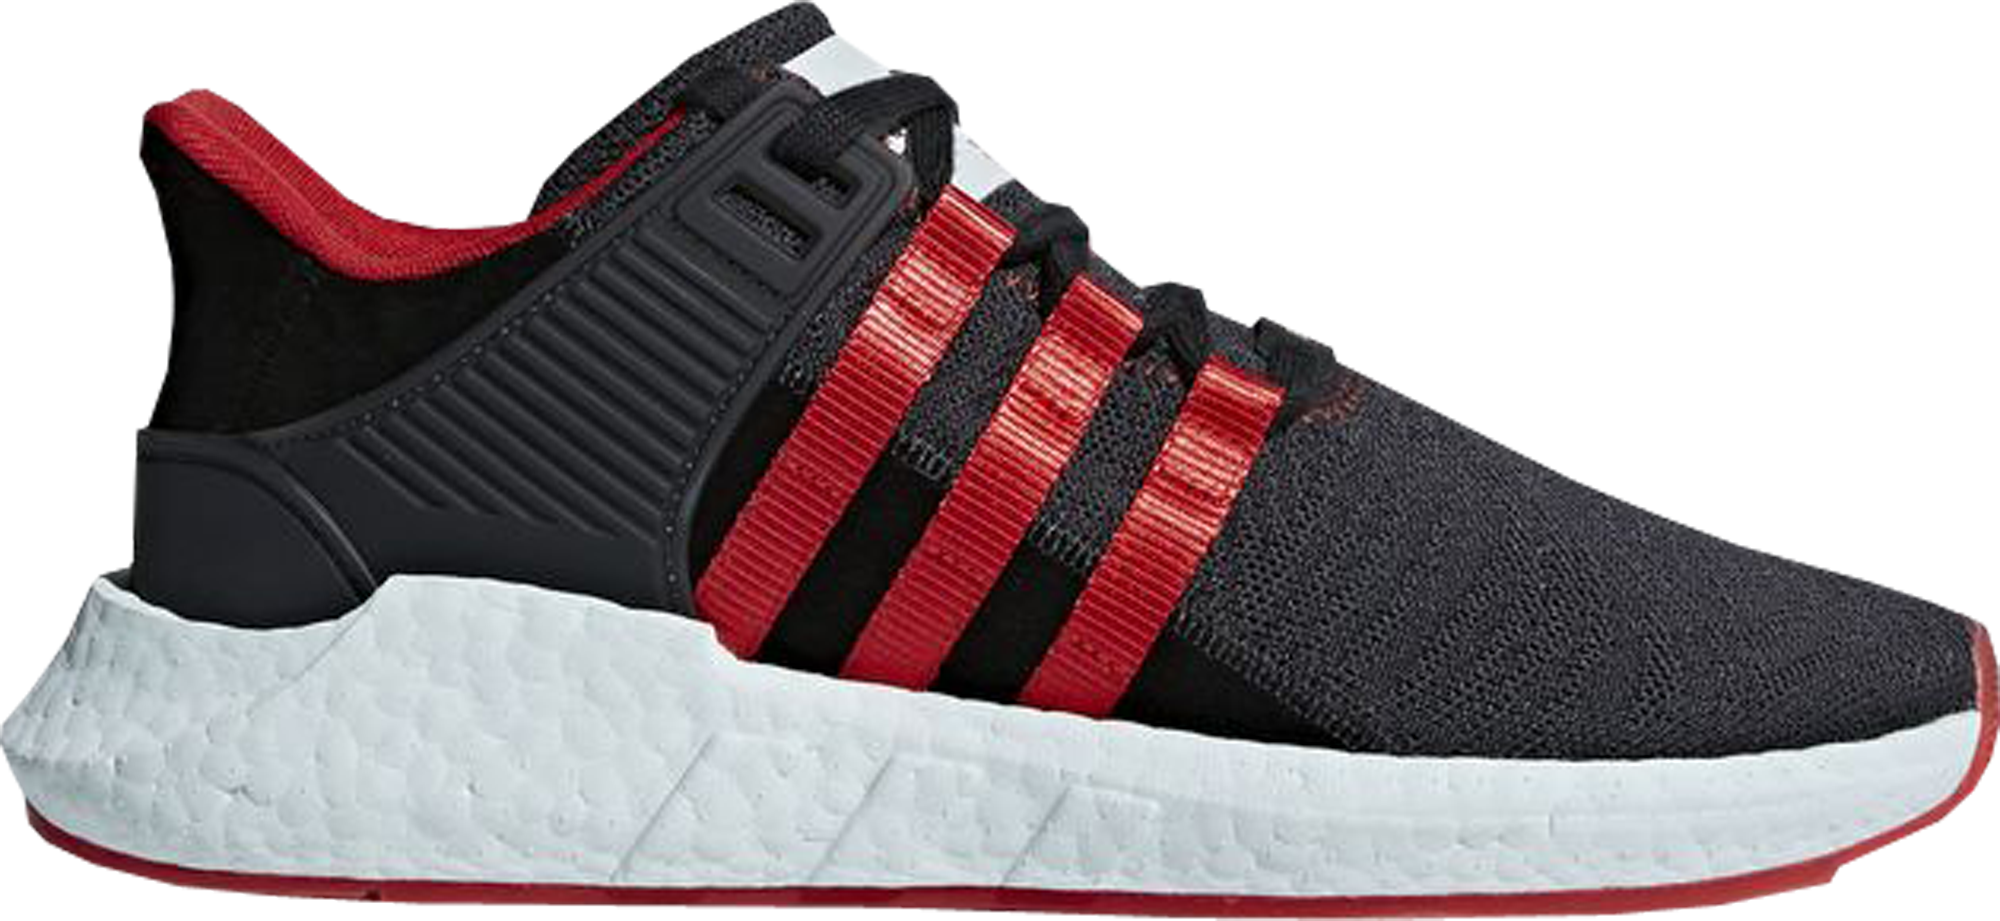 adidas EQT Support 93/17 Yuanxiao - DB2571